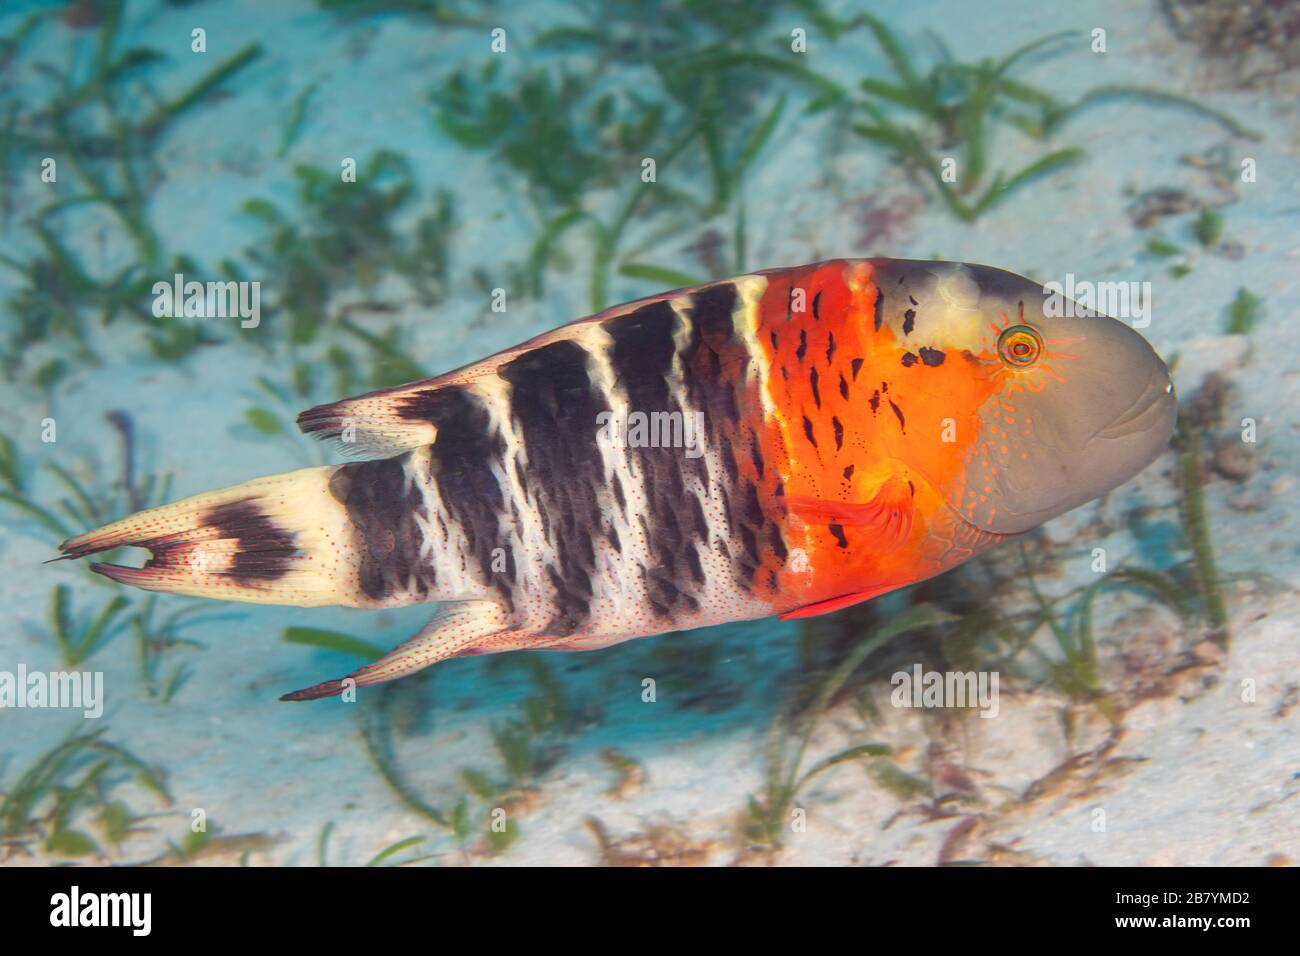 The red-breasted wrasse,Cheilinus fasciatus, can reach up to 14 inches and is usually solitary, Philippines. Stock Photo